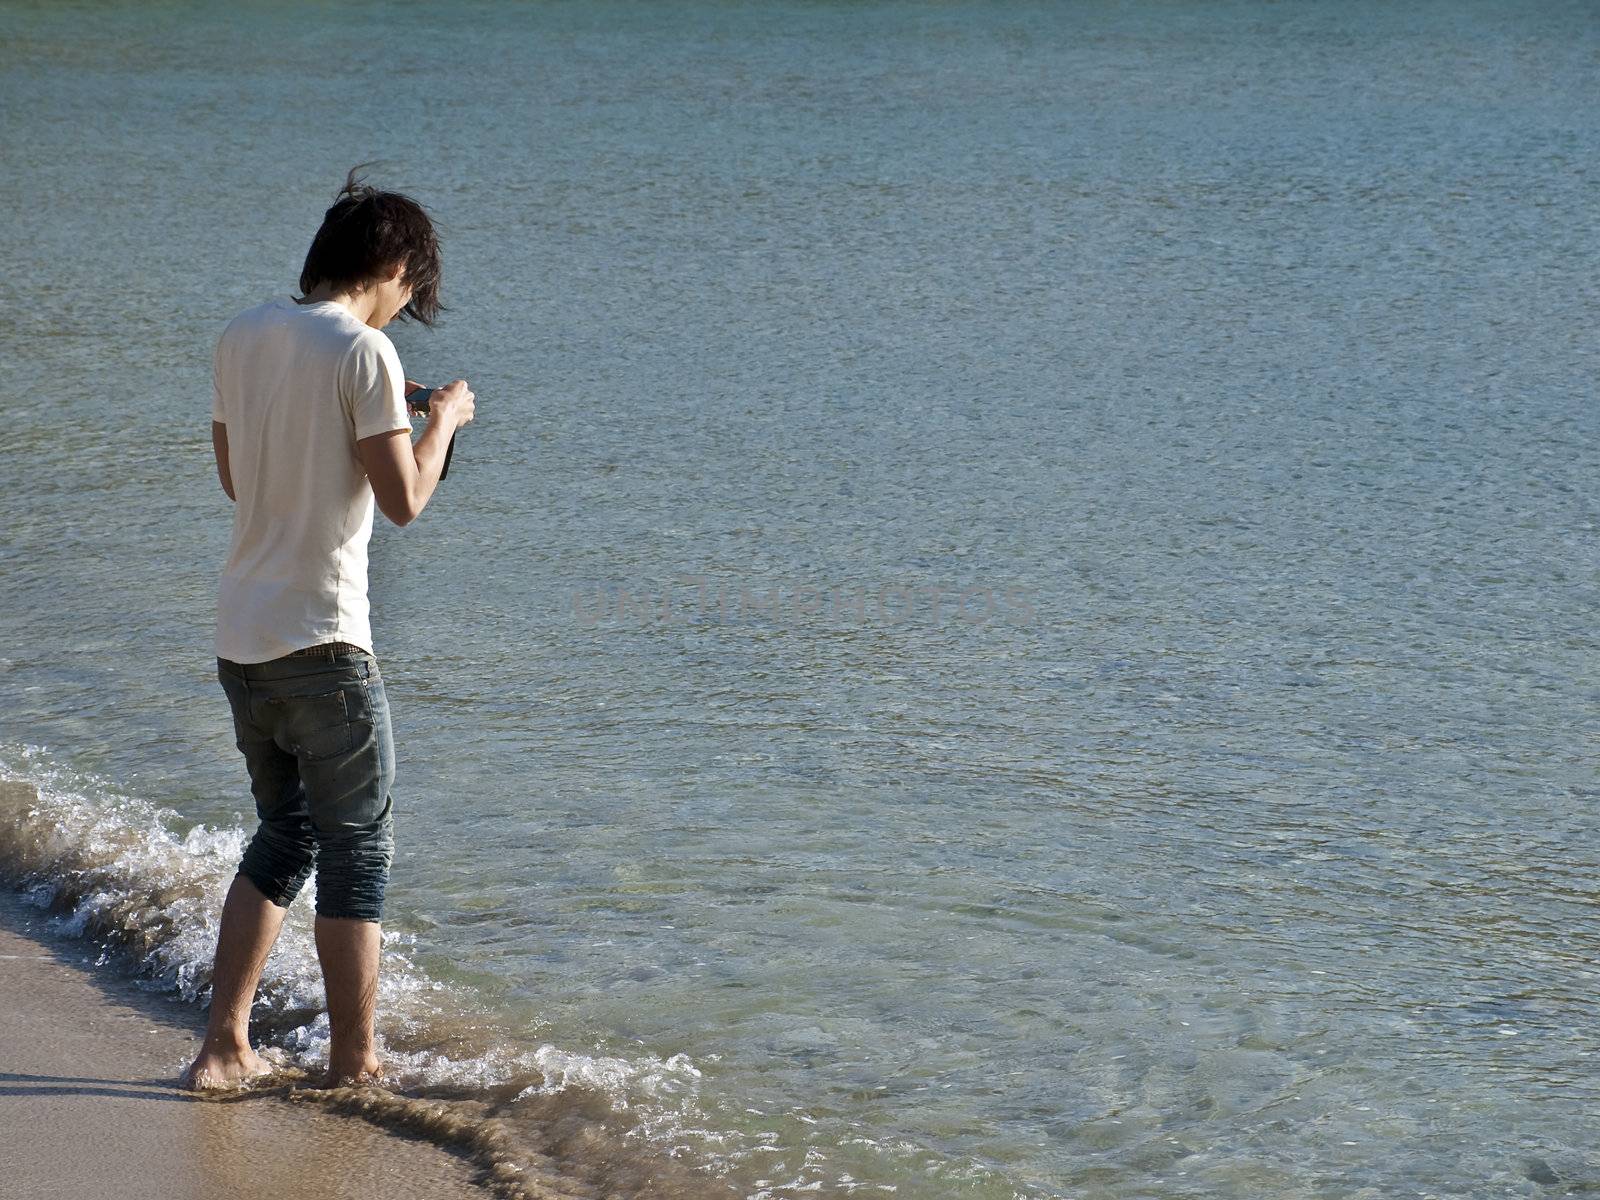 Asian man taking pictures on a beach on the Mediterranean island of Malta